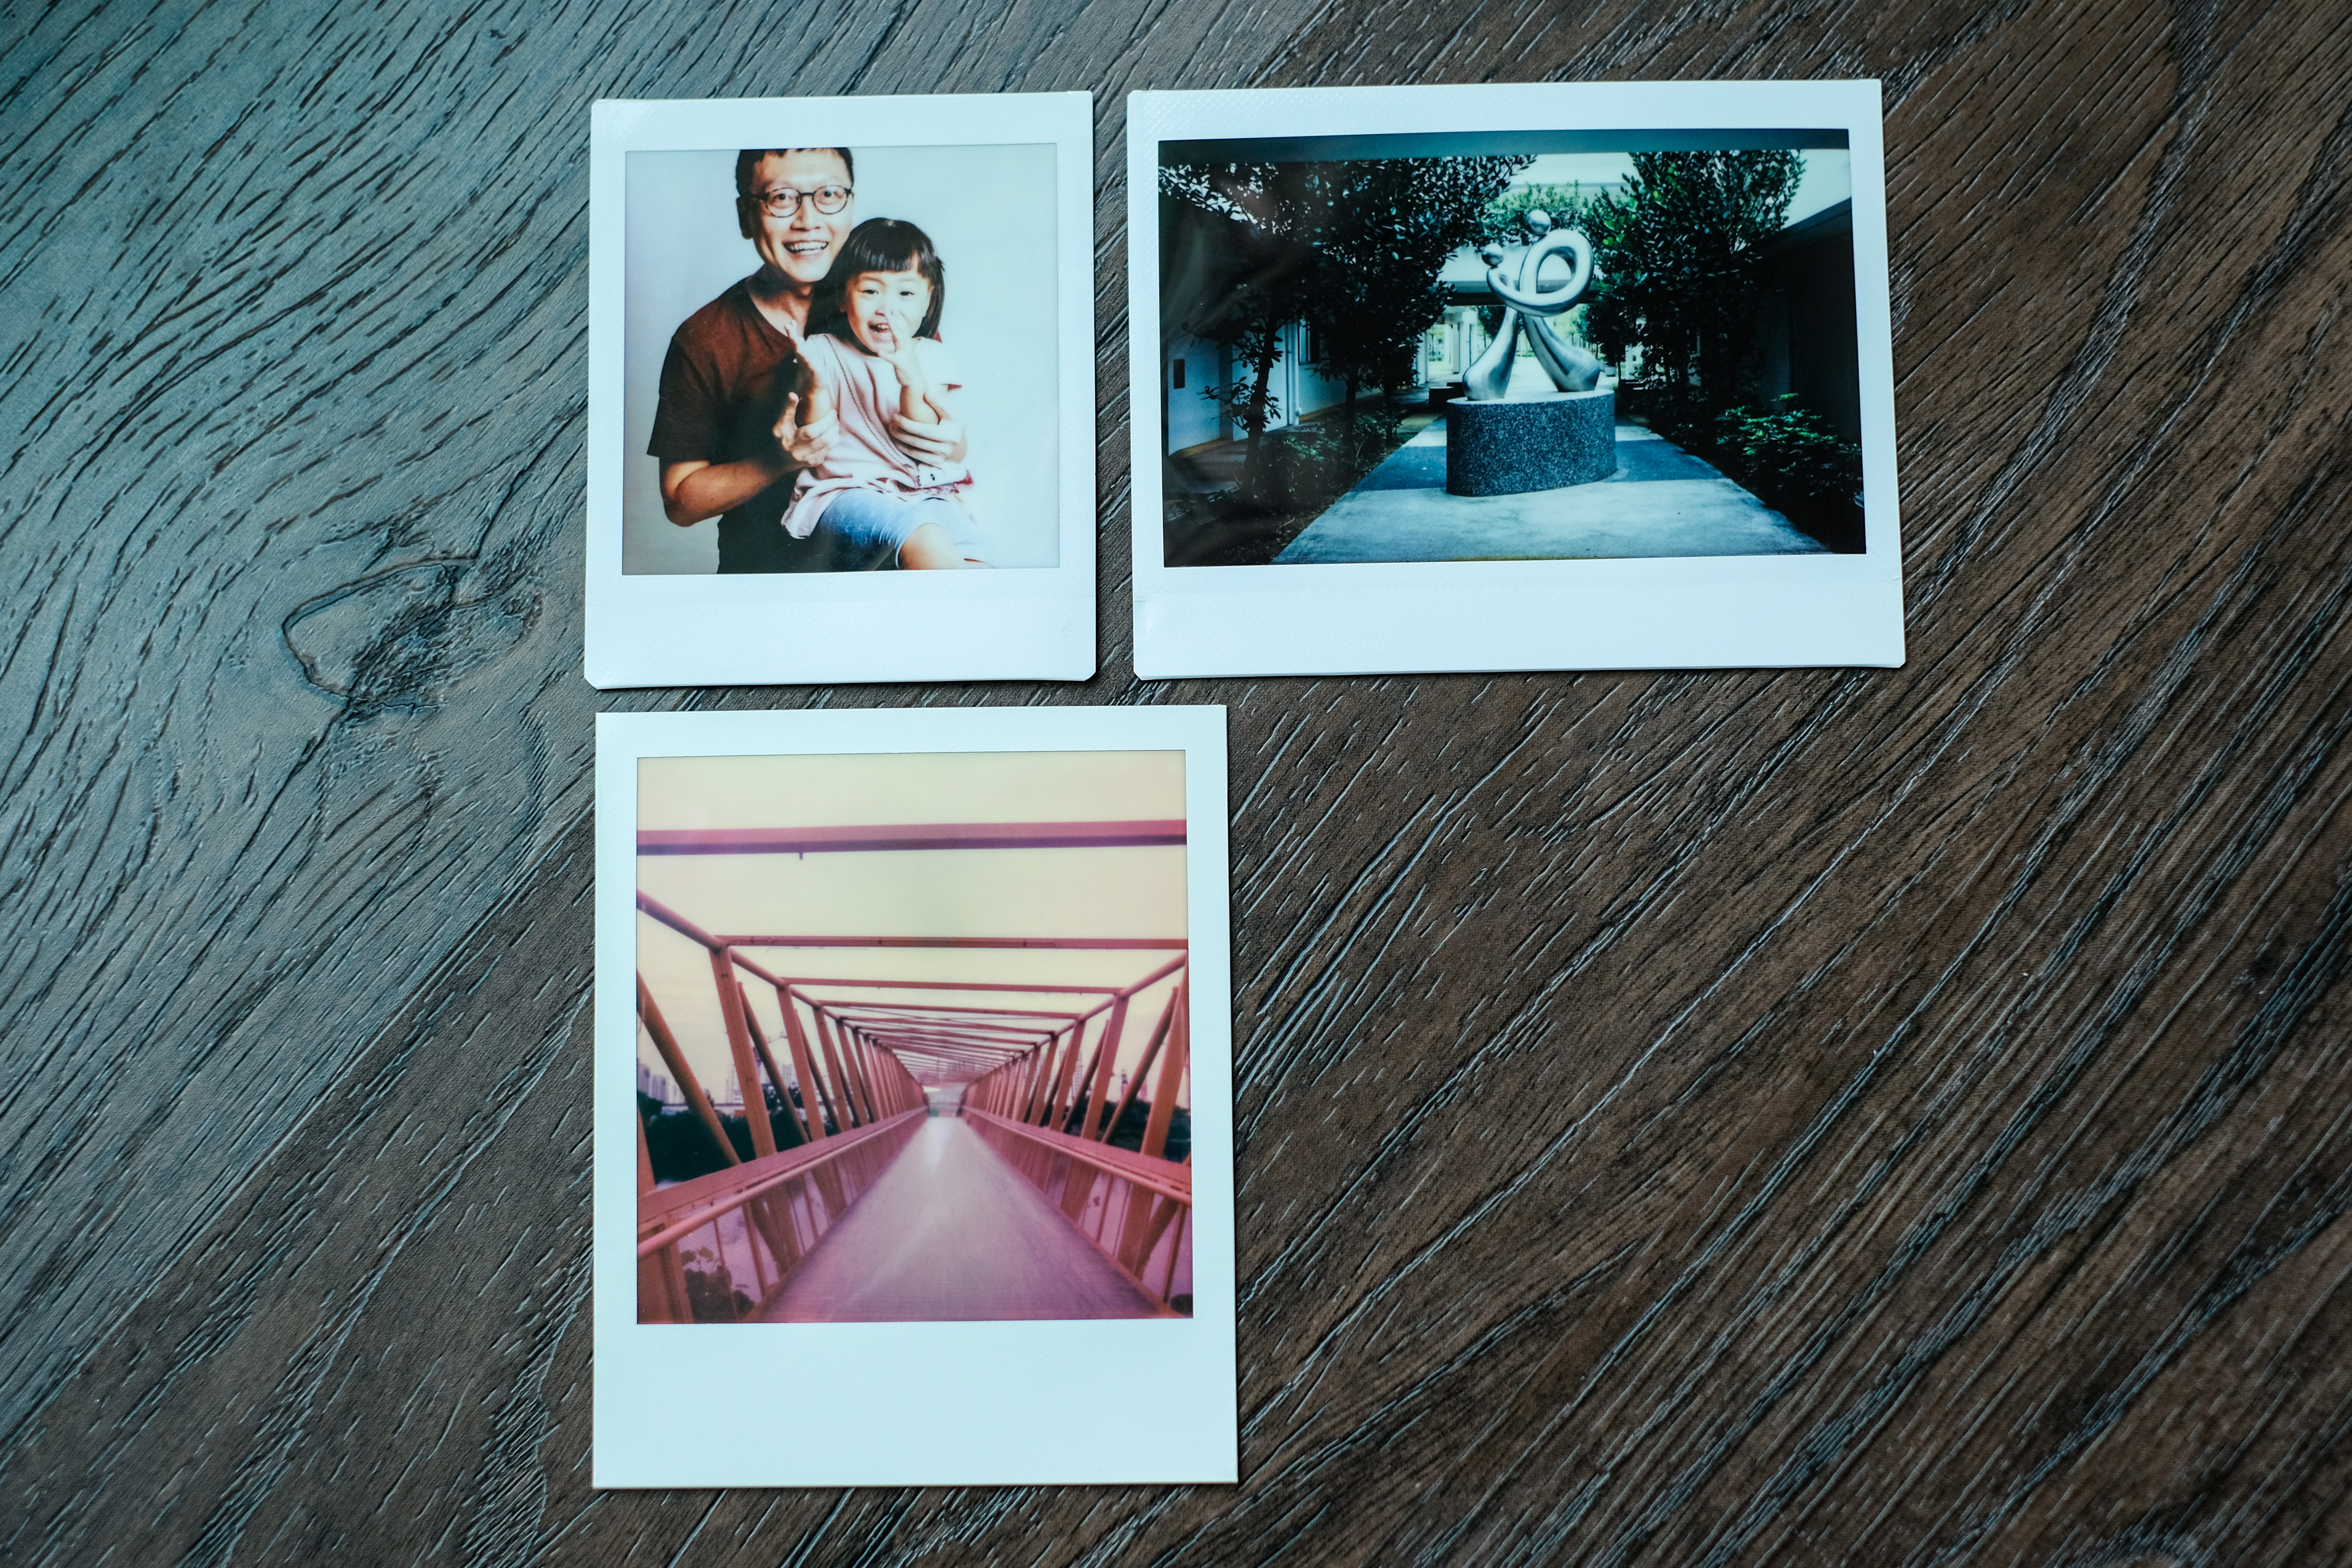 Review : Polaroid Originals OneStep 2 with i-Type films. – KeithWee